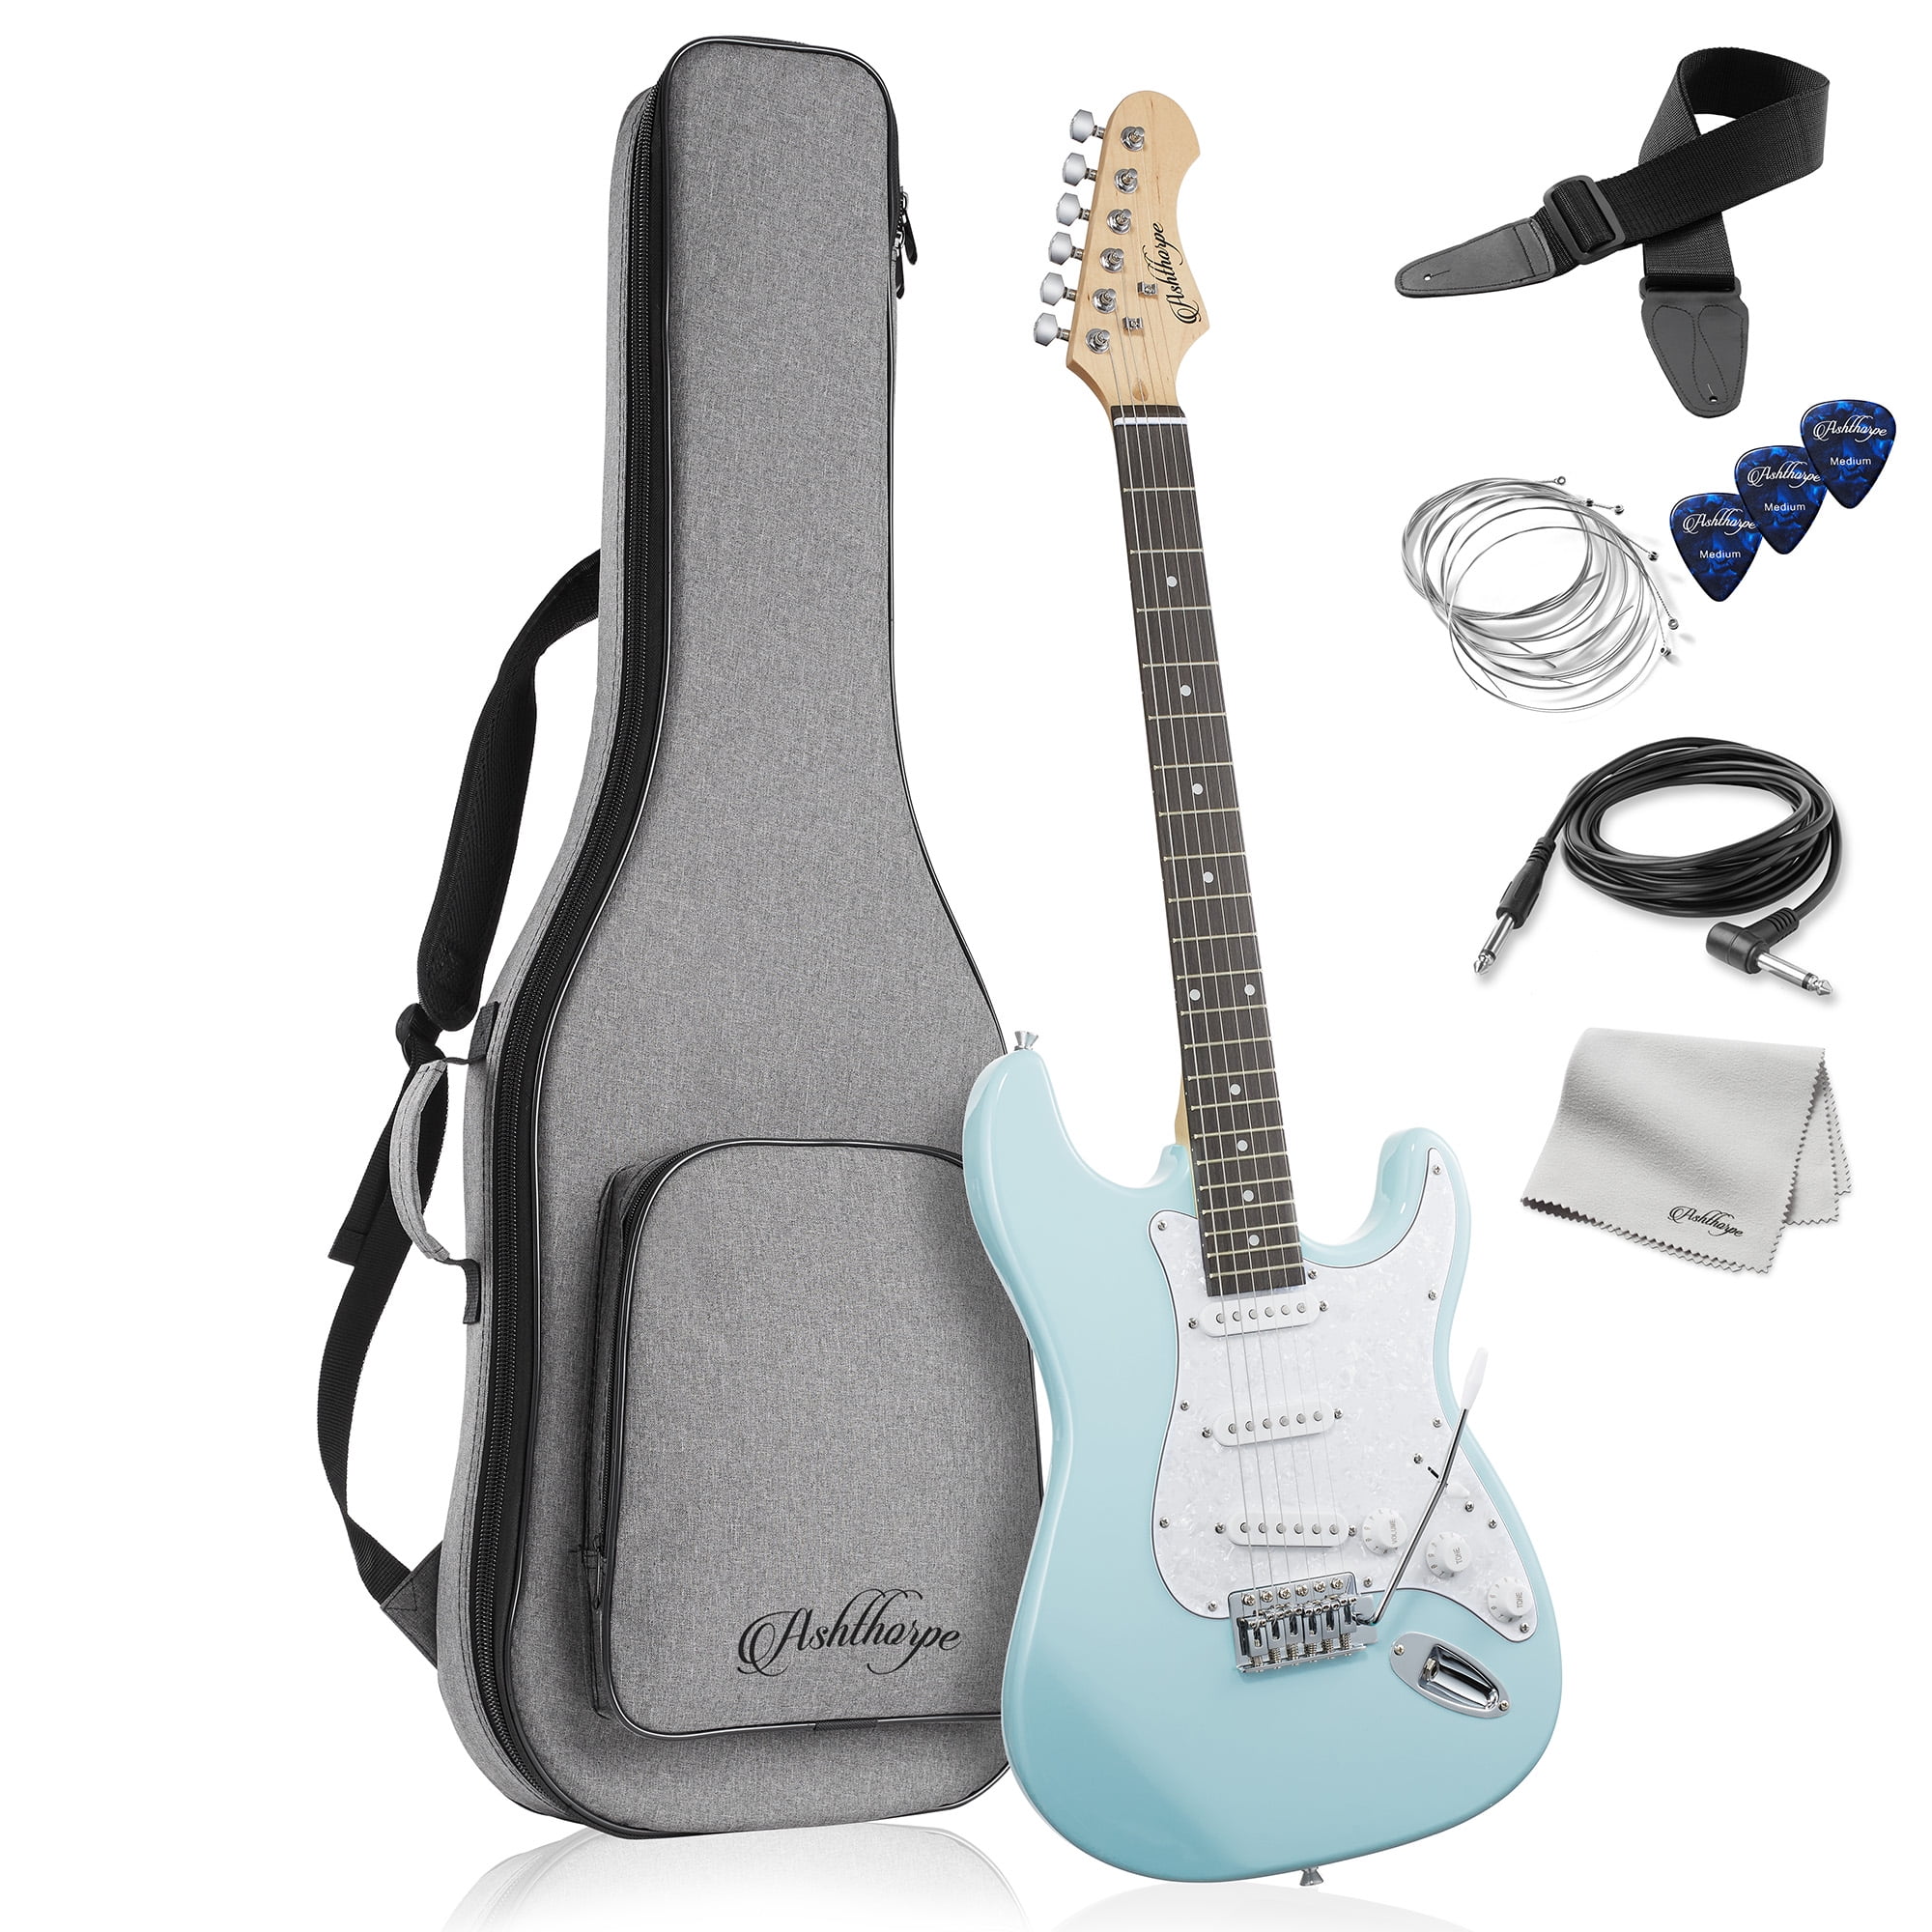 Sunset Best Holiday Gift 6 Strings Basswood Body GTL Style Electric Guitars Set Full Size Guitar Kit With 3 Way Switch Volume & Tone 39 Inch Beginner Electric Guitar for Kids Adults 